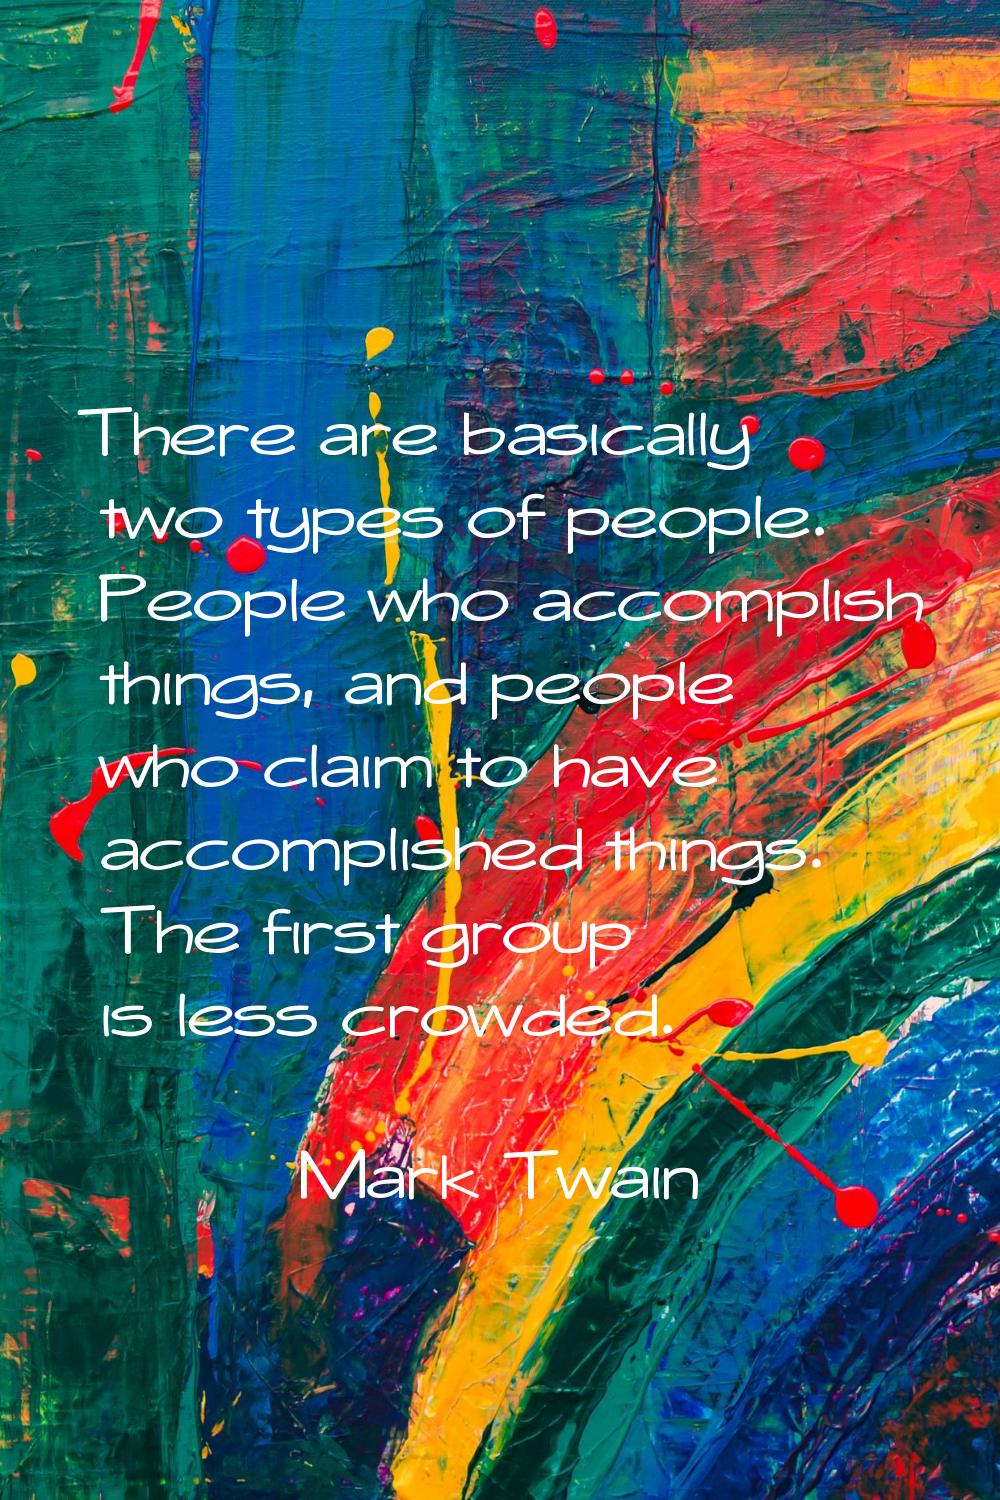 There are basically two types of people. People who accomplish things, and people who claim to have